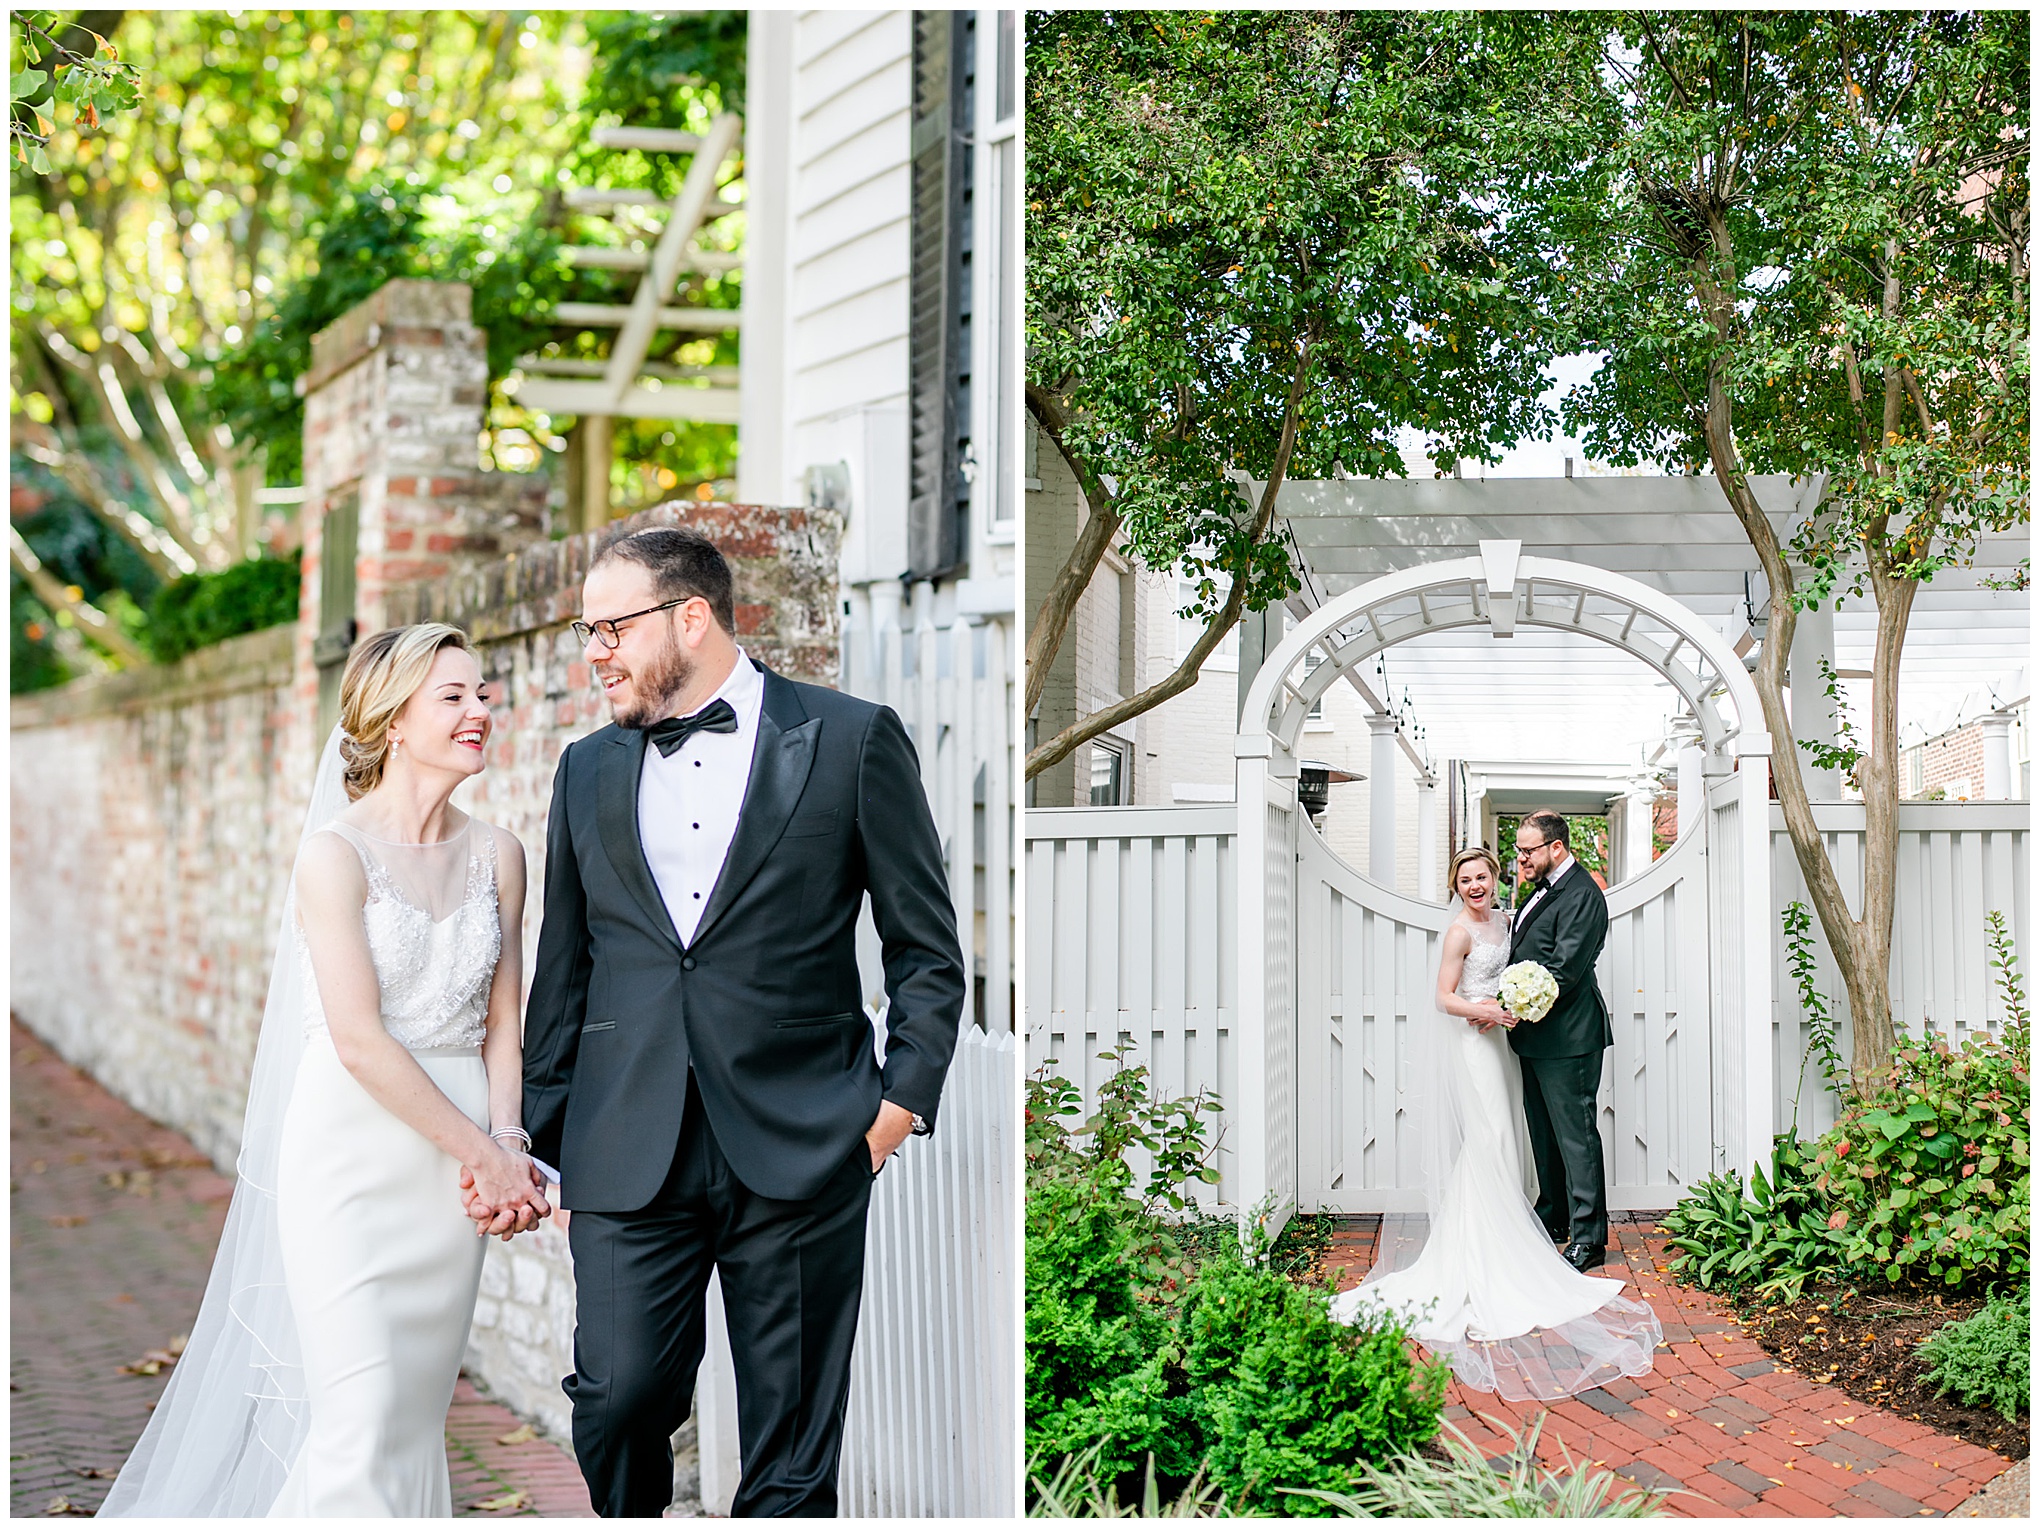 autumn Old Town Alexandria wedding, Old Town photographer, Alexandria wedding photographer, Northern Virginia wedding photographer, DC wedding photographer, Rachel E.H. Photography, autumn wedding, early autumn wedding, warm weather wedding, white aesthetic, classic wedding aesthetic, classic bride and groom, magic hour portraits, historic side streets, happy bride, romantic portrait